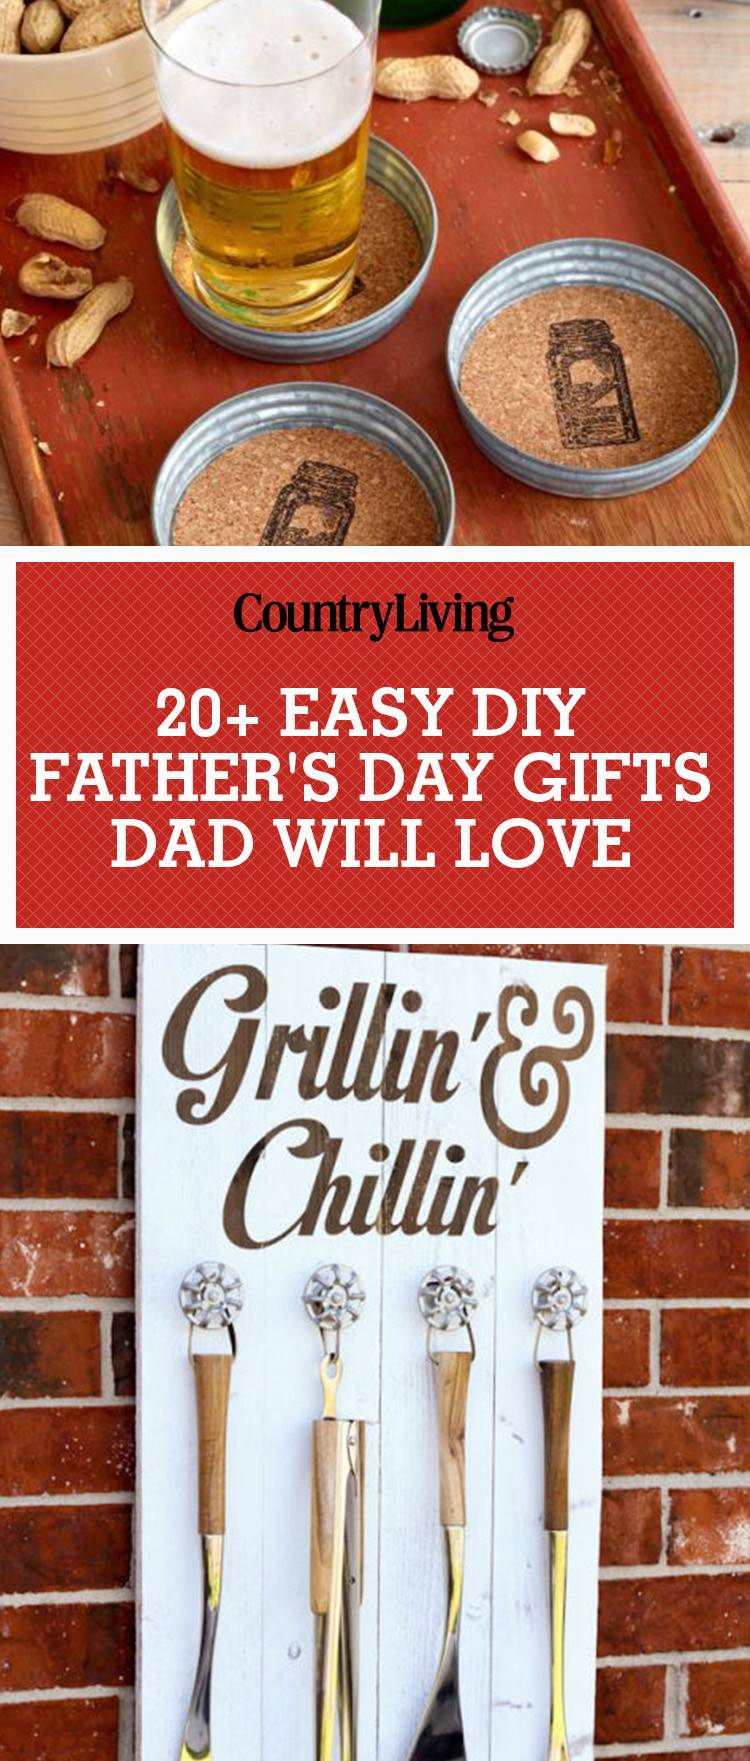 DIY Last Minute Father'S Day Gifts
 25 DIY Fathers Day Gifts & Crafts Homemade Ideas for